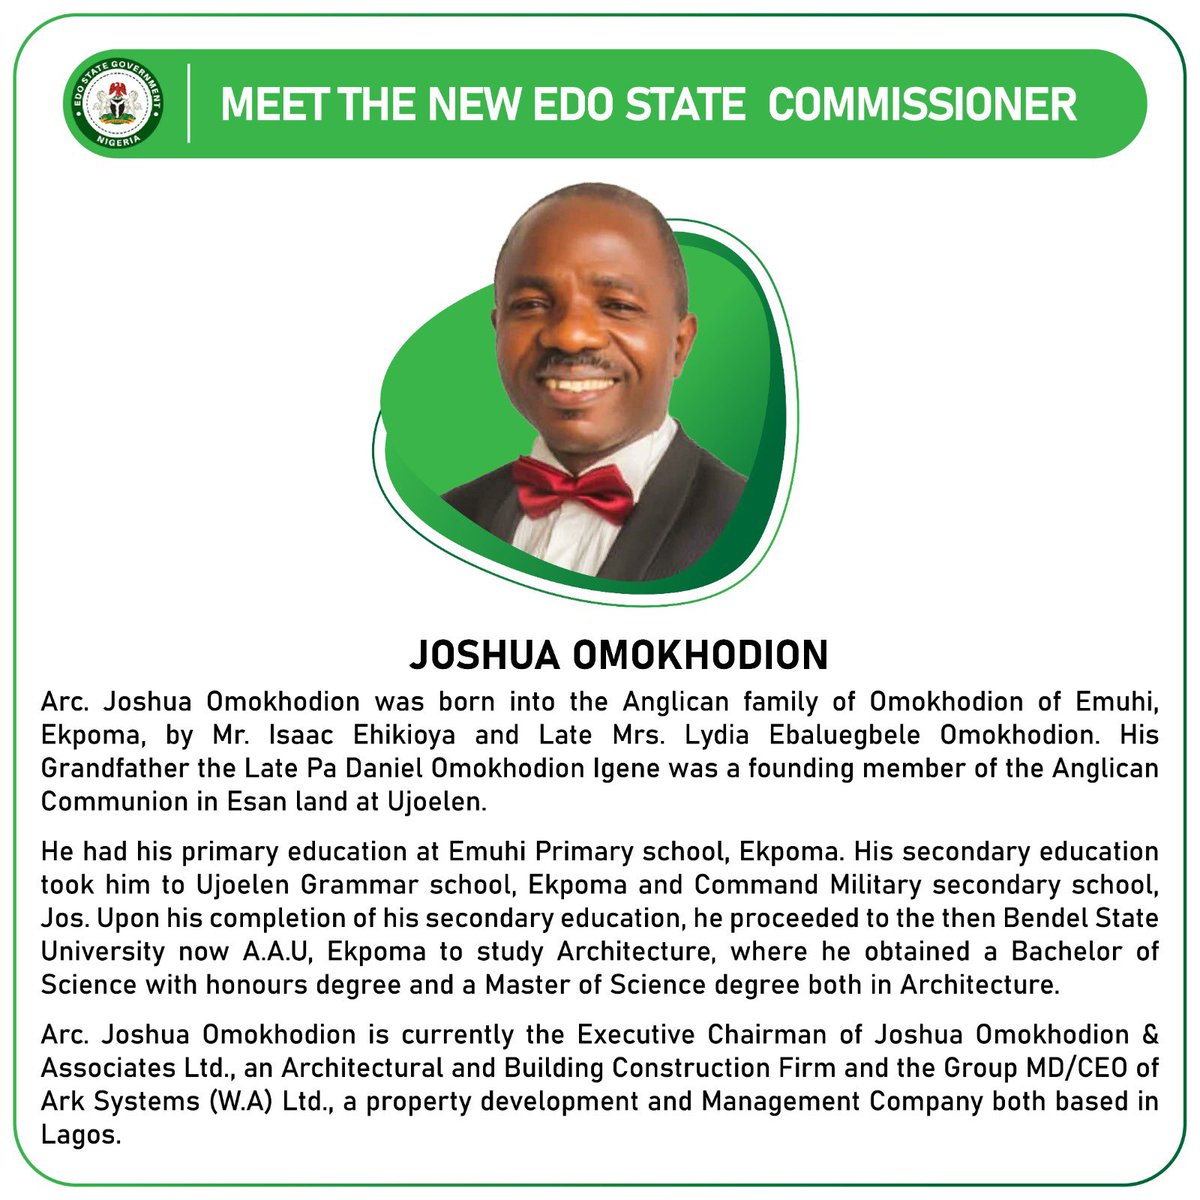 My eyes will be on d new commissioner of environment @Edo_Environment Joshua Omokhodion..Owaen lahor, 🙏🏾 don’t fail like d previous one did. D city needs cleaning nd i’m counting on u to do it. @arcomokay ur twitter doesn’t seem active i even saw a tweet by u about bbtitans🤦🏾‍♂️😩😂